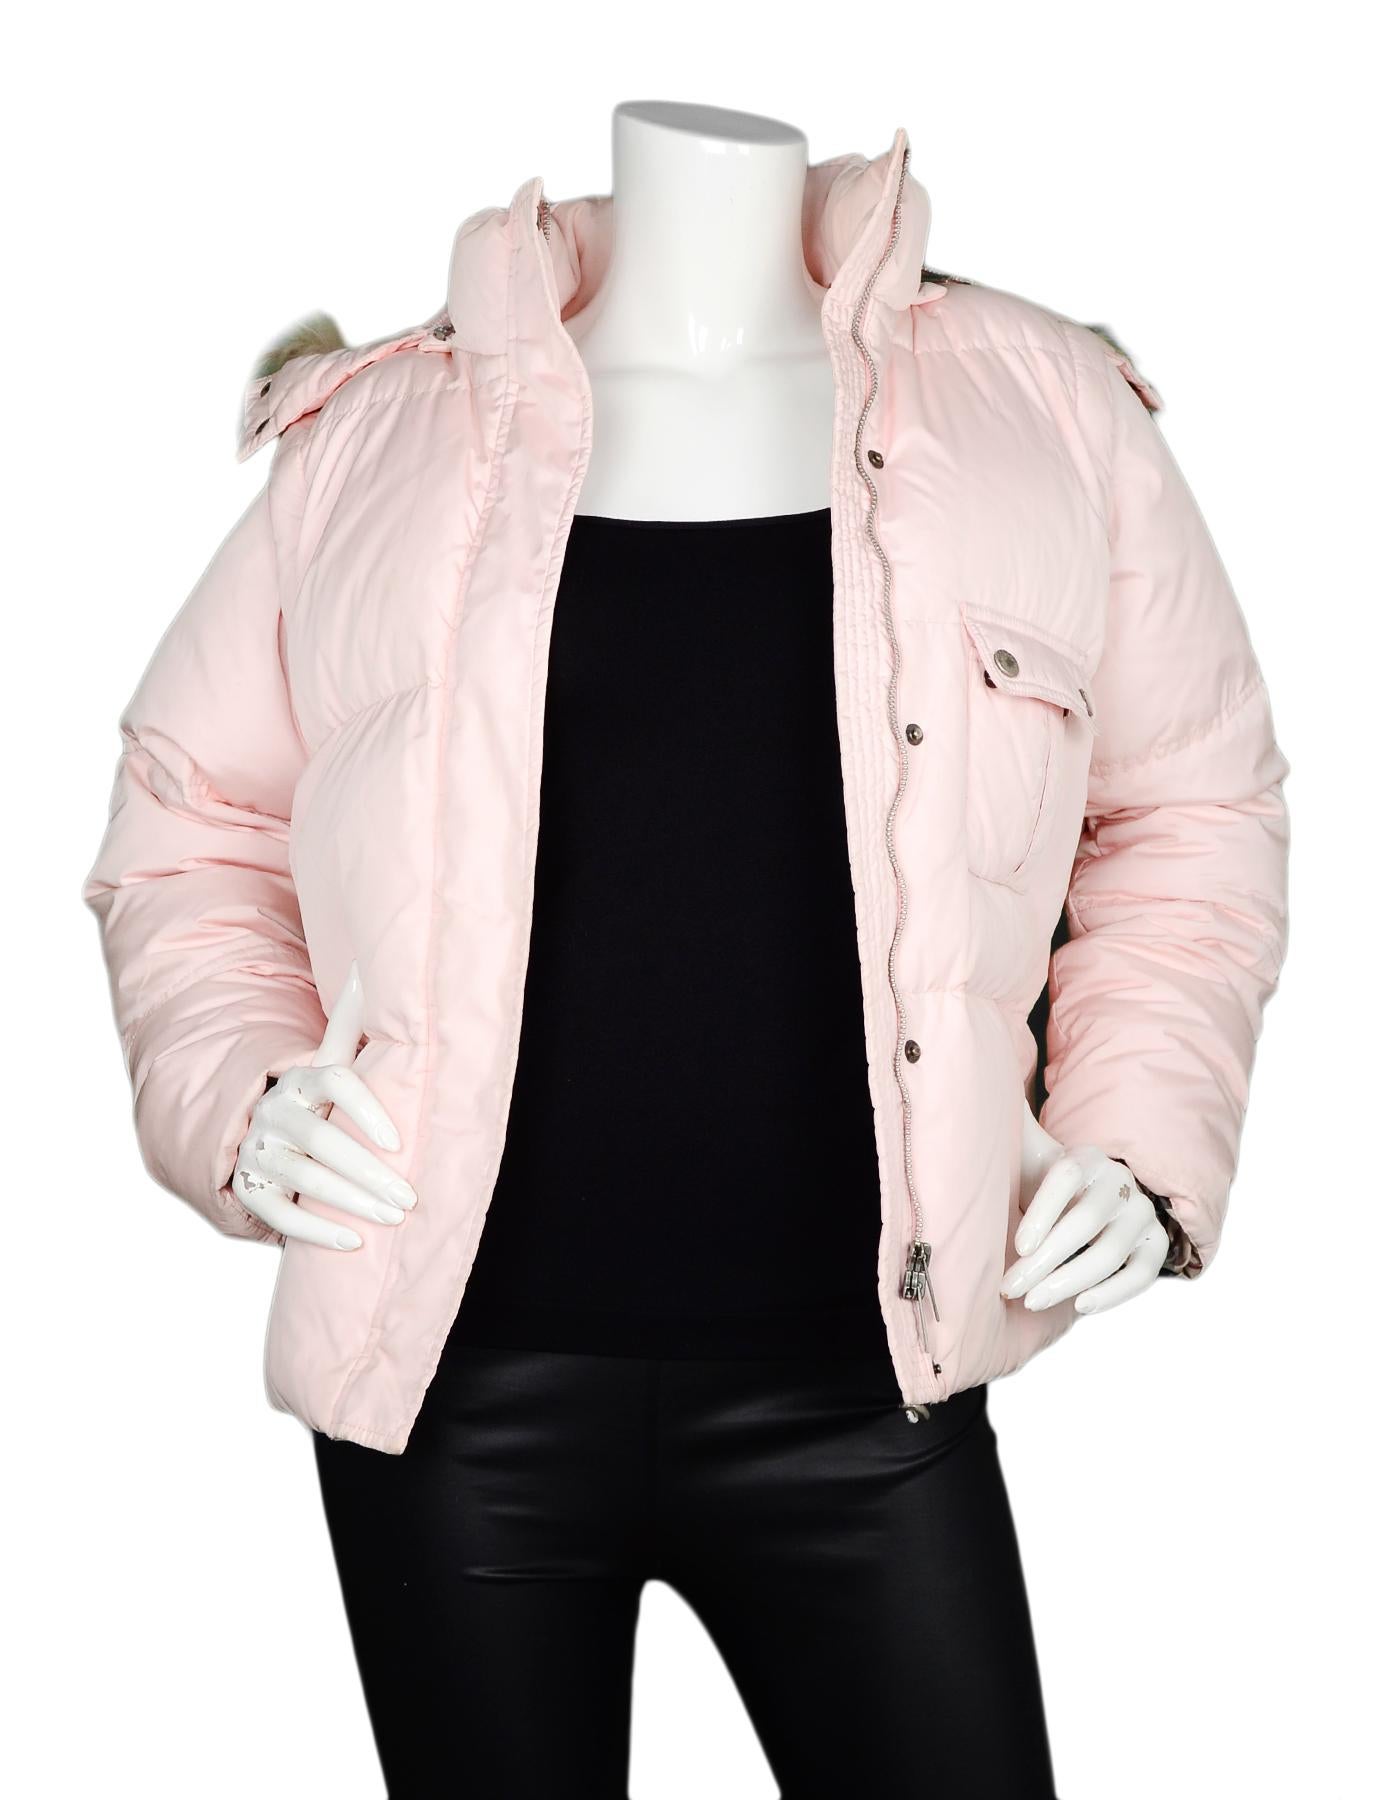 Burberry Light Pink Puffer Coat W/ Removable Fur Trim Hood & Sleeves (Into Vest) Sz M

Made In: China
Color: Light pink
Materials: 97% nylon, 3% polyurethane
Lining: 100% polyester
Opening/Closure: Zip and snap button front
Overall Condition: